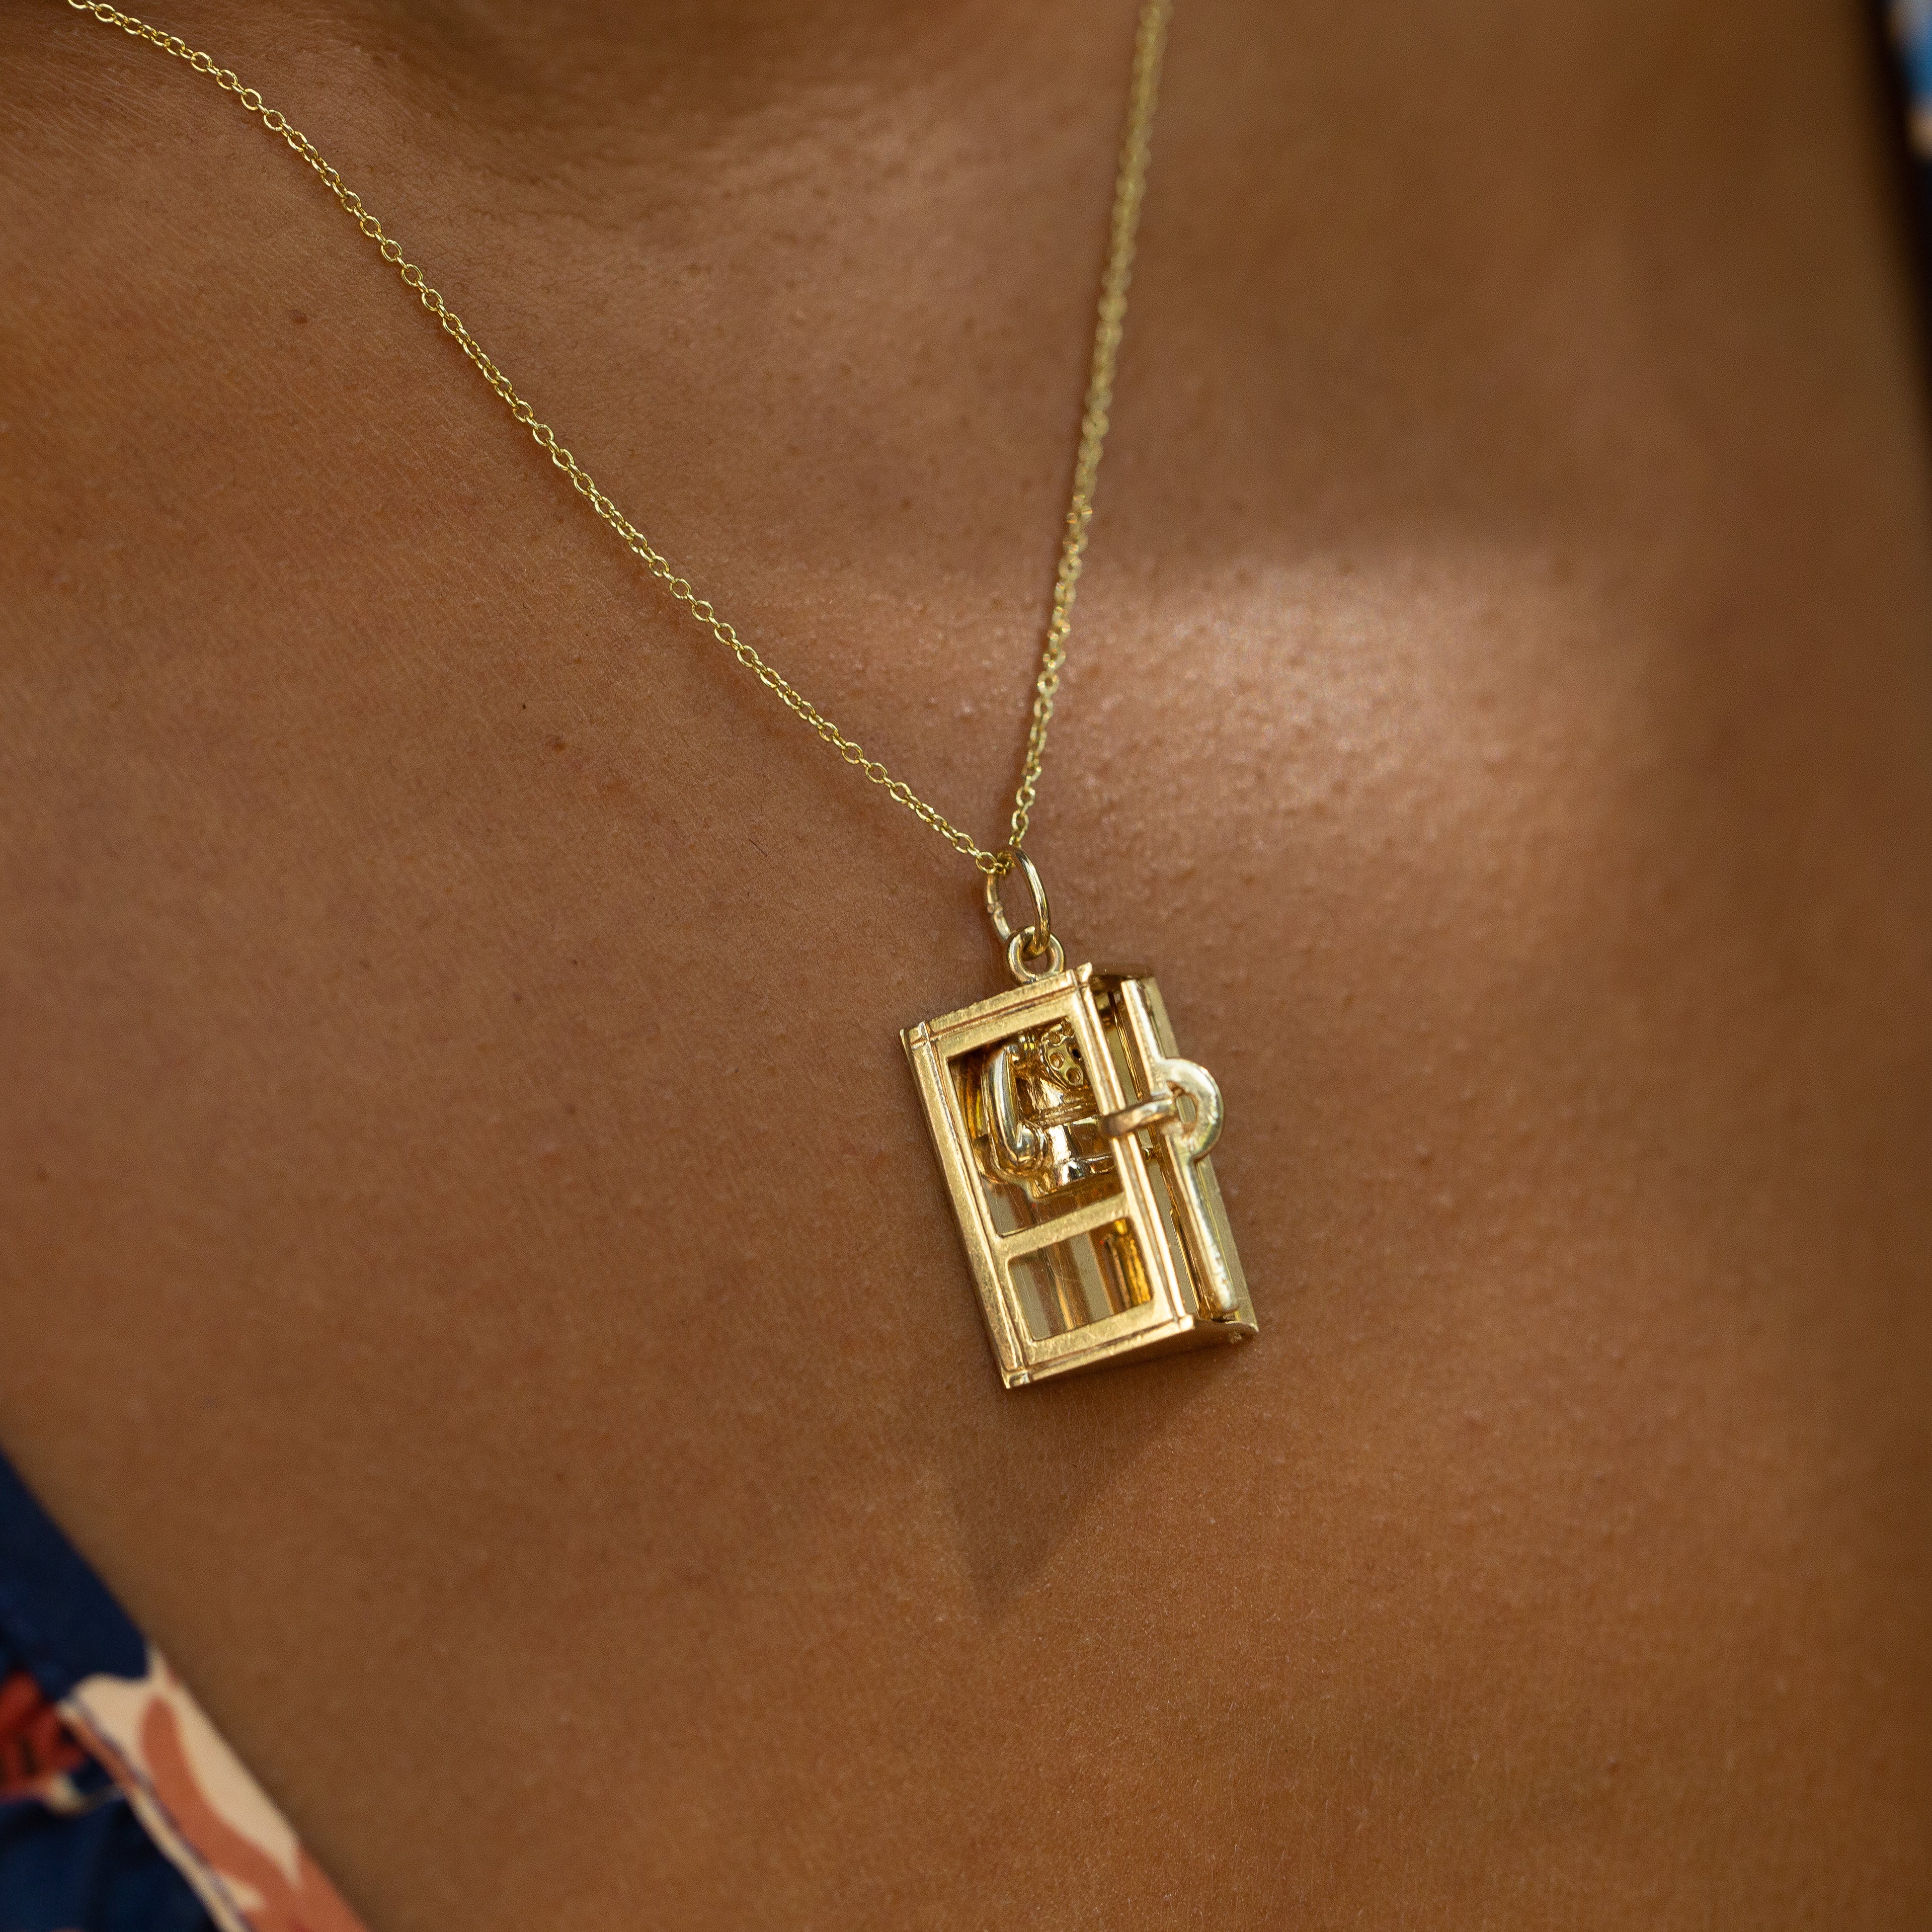 Movable 14k Gold Phone Booth Charm